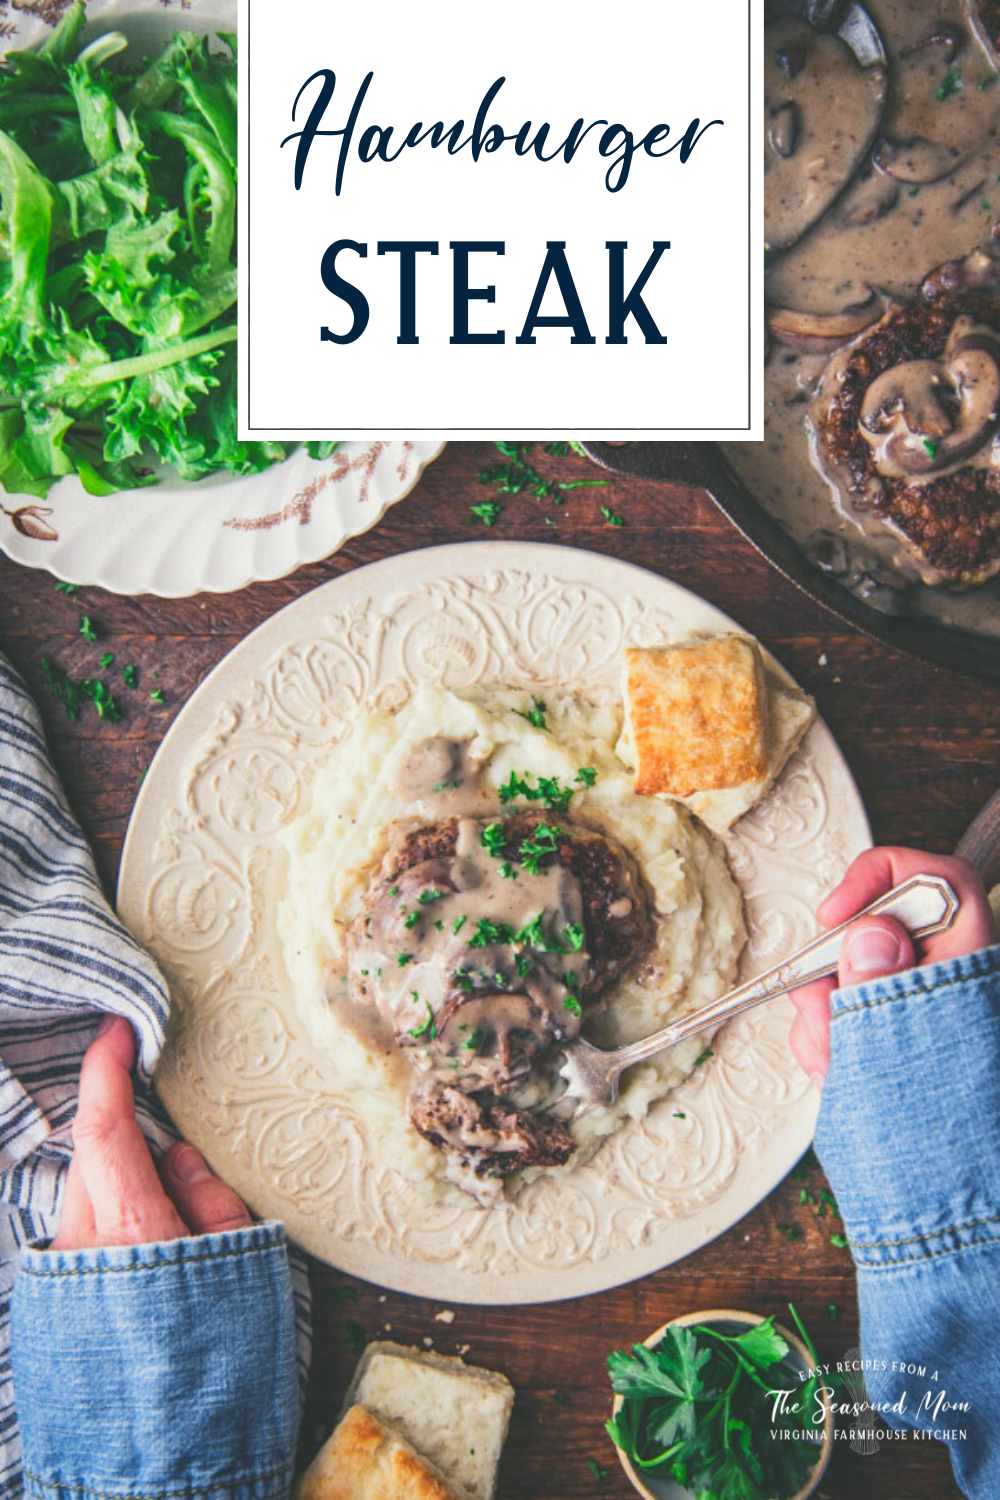 Overhead shot of hands eating a plate of mashed potatoes and hamburger steak with gravy and text title overlay